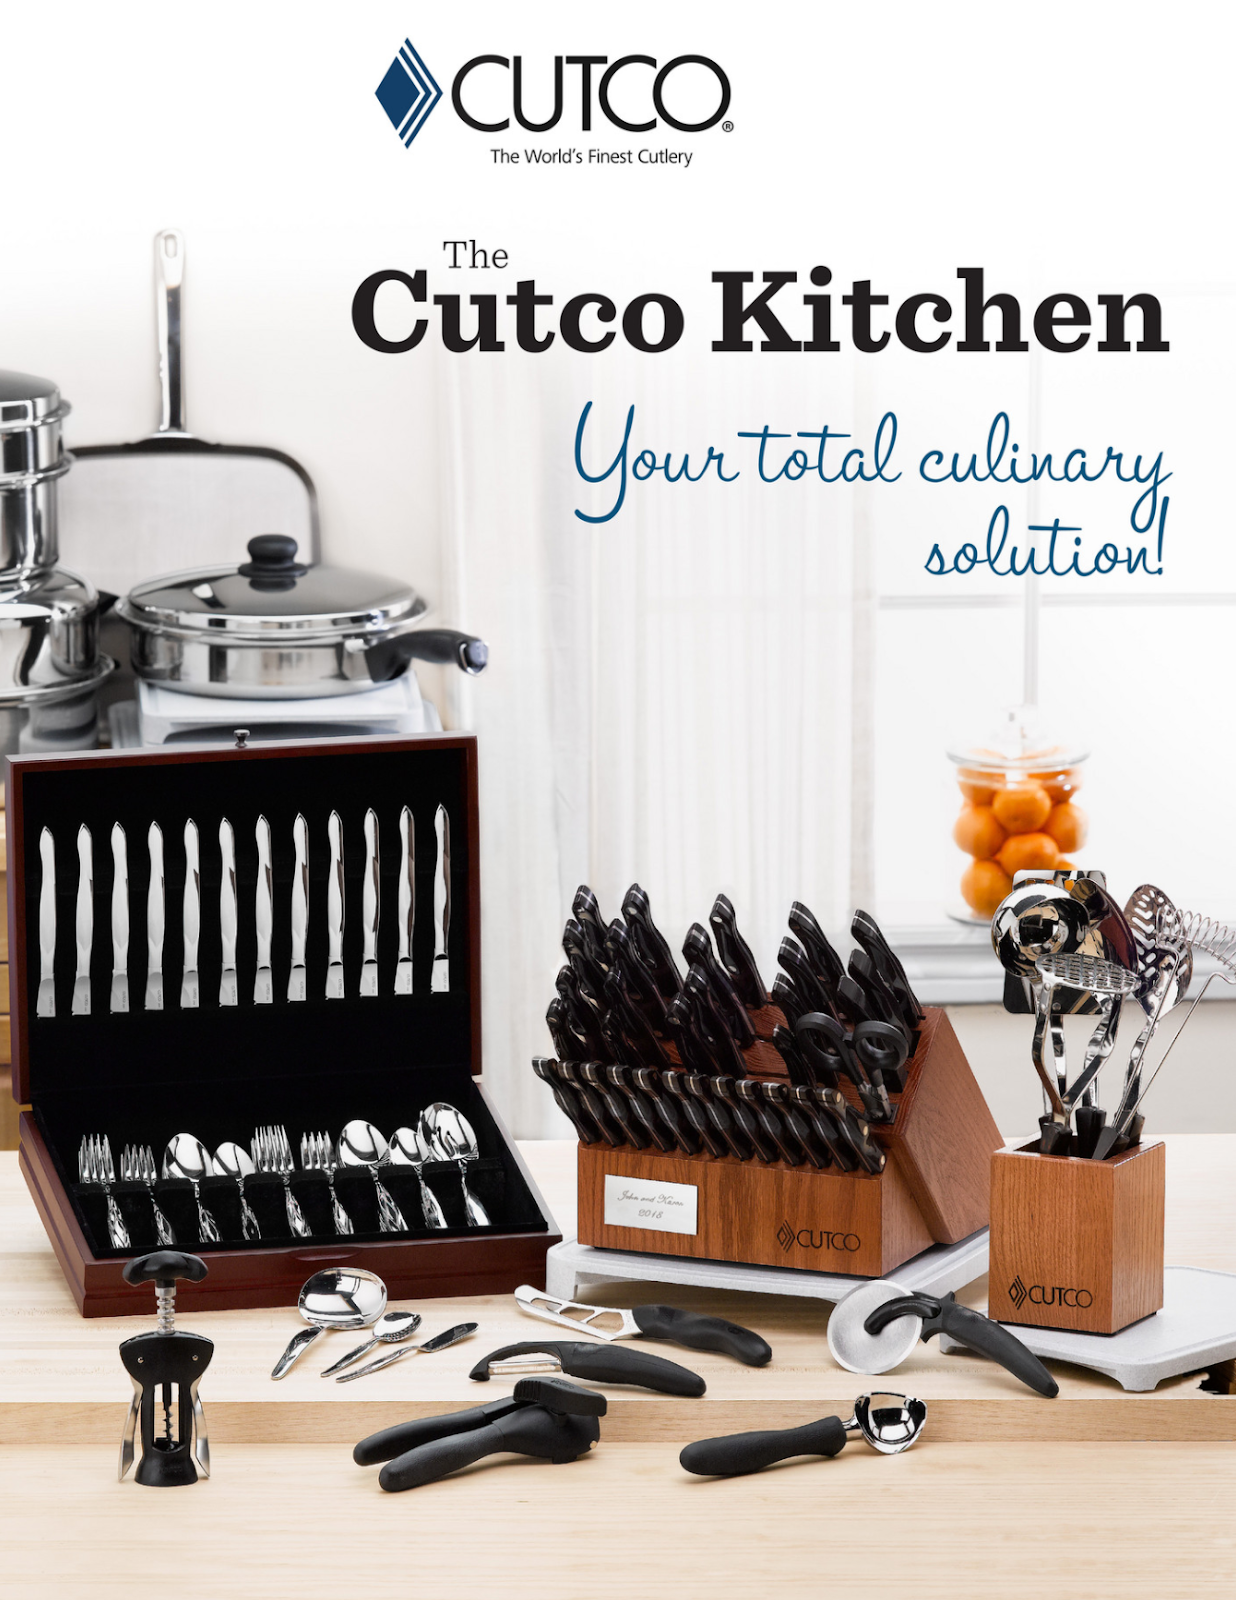 Cutco Cutlery - Calling all nature-lovers, backpackers, etc